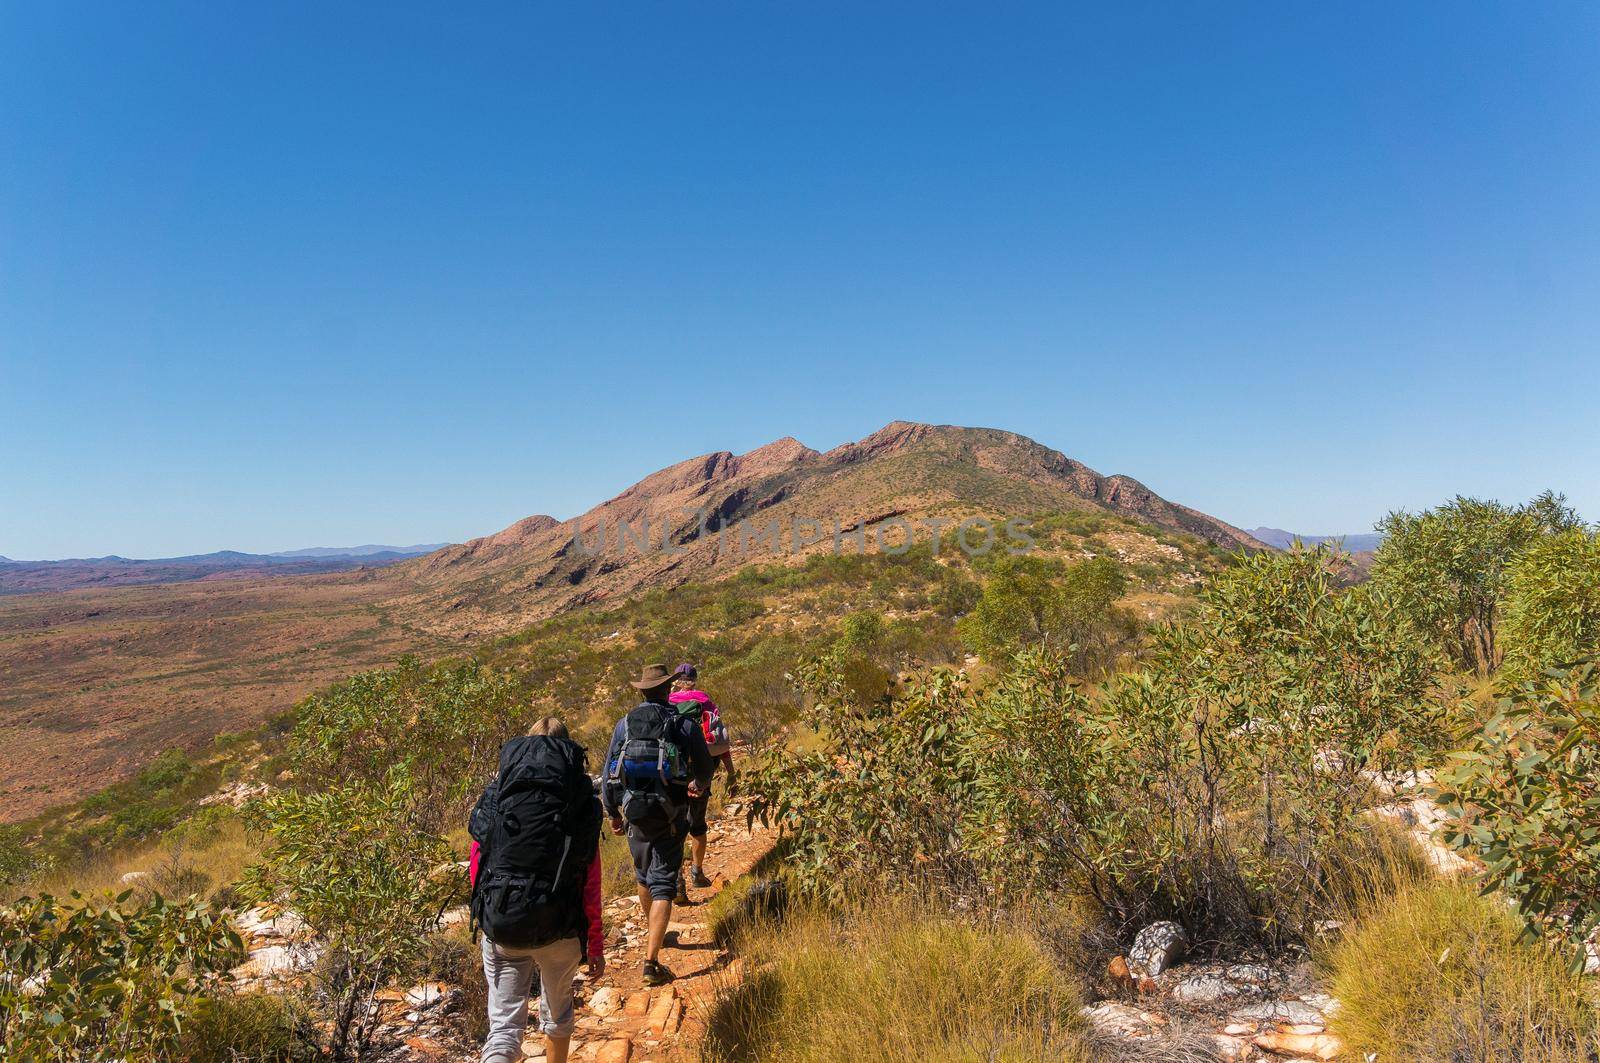 a group of Hikers on the way to the top of Mount Sonder just outside Alice Springs, West MacDonnel National Park, Australia by bettercallcurry